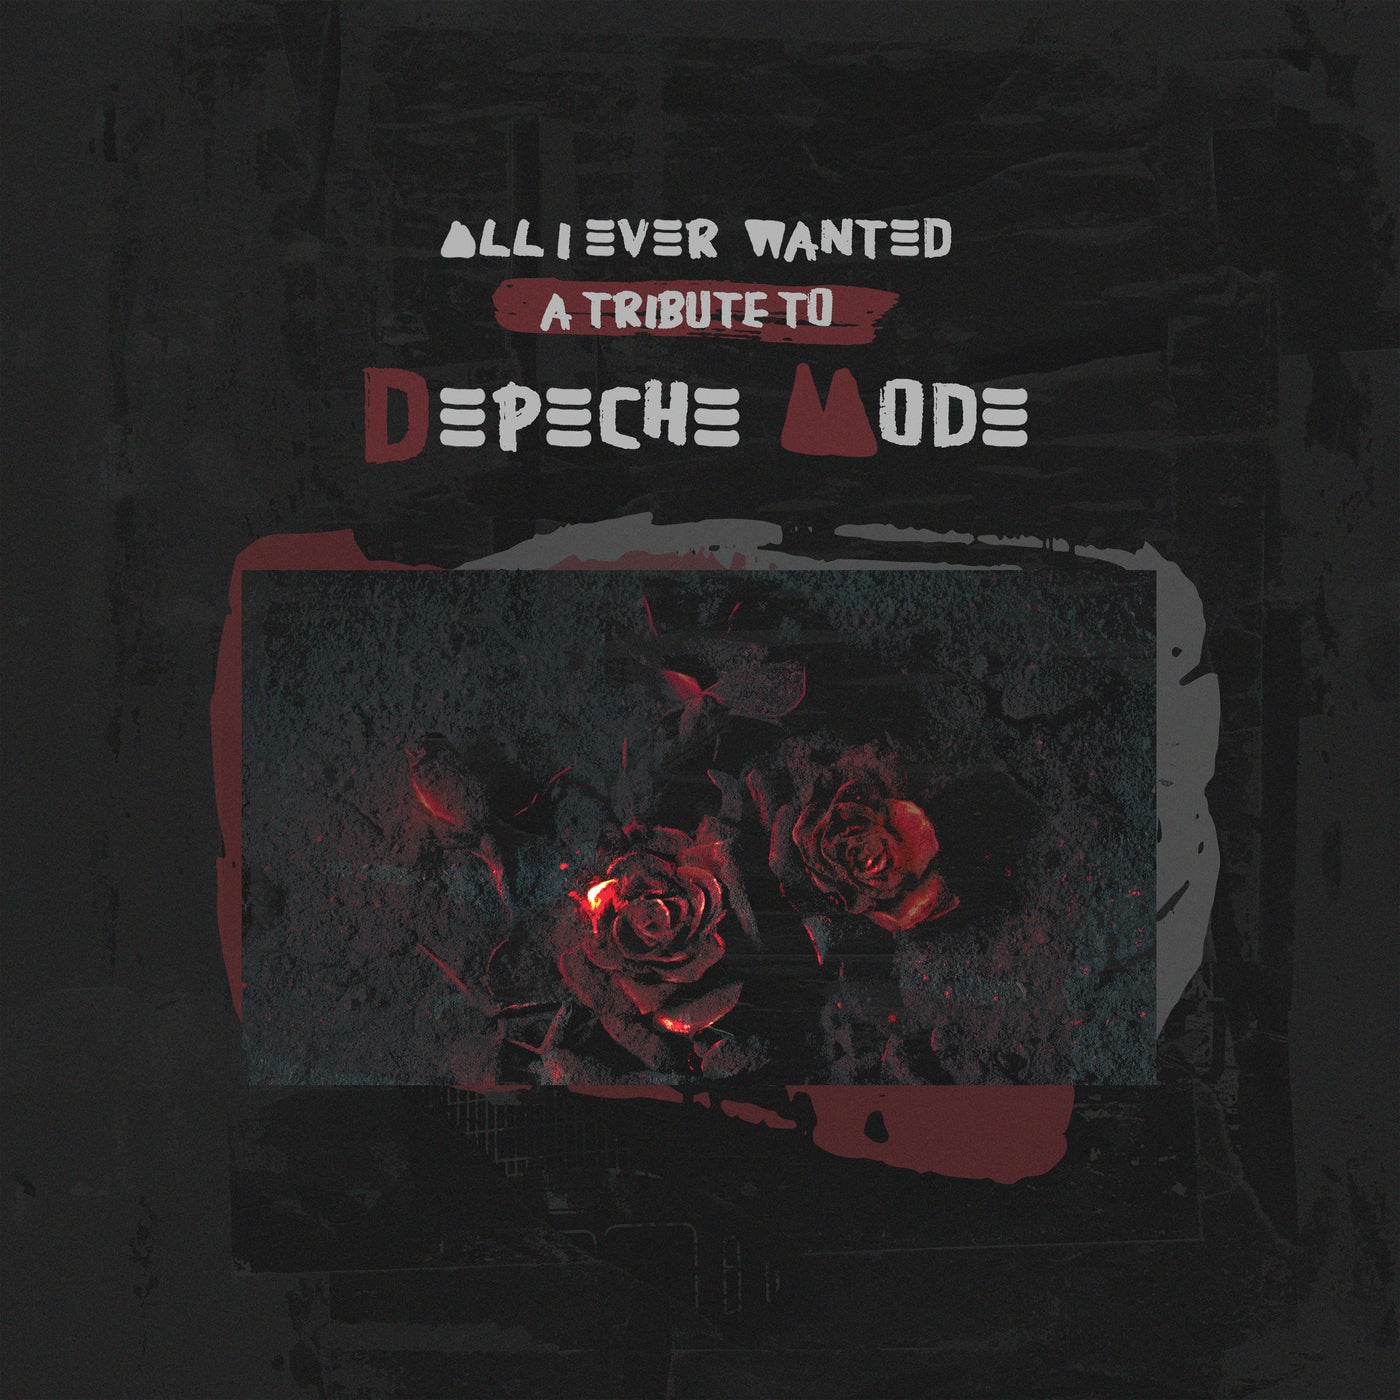 All I Ever Wanted - A Tribute to Depeche Mode